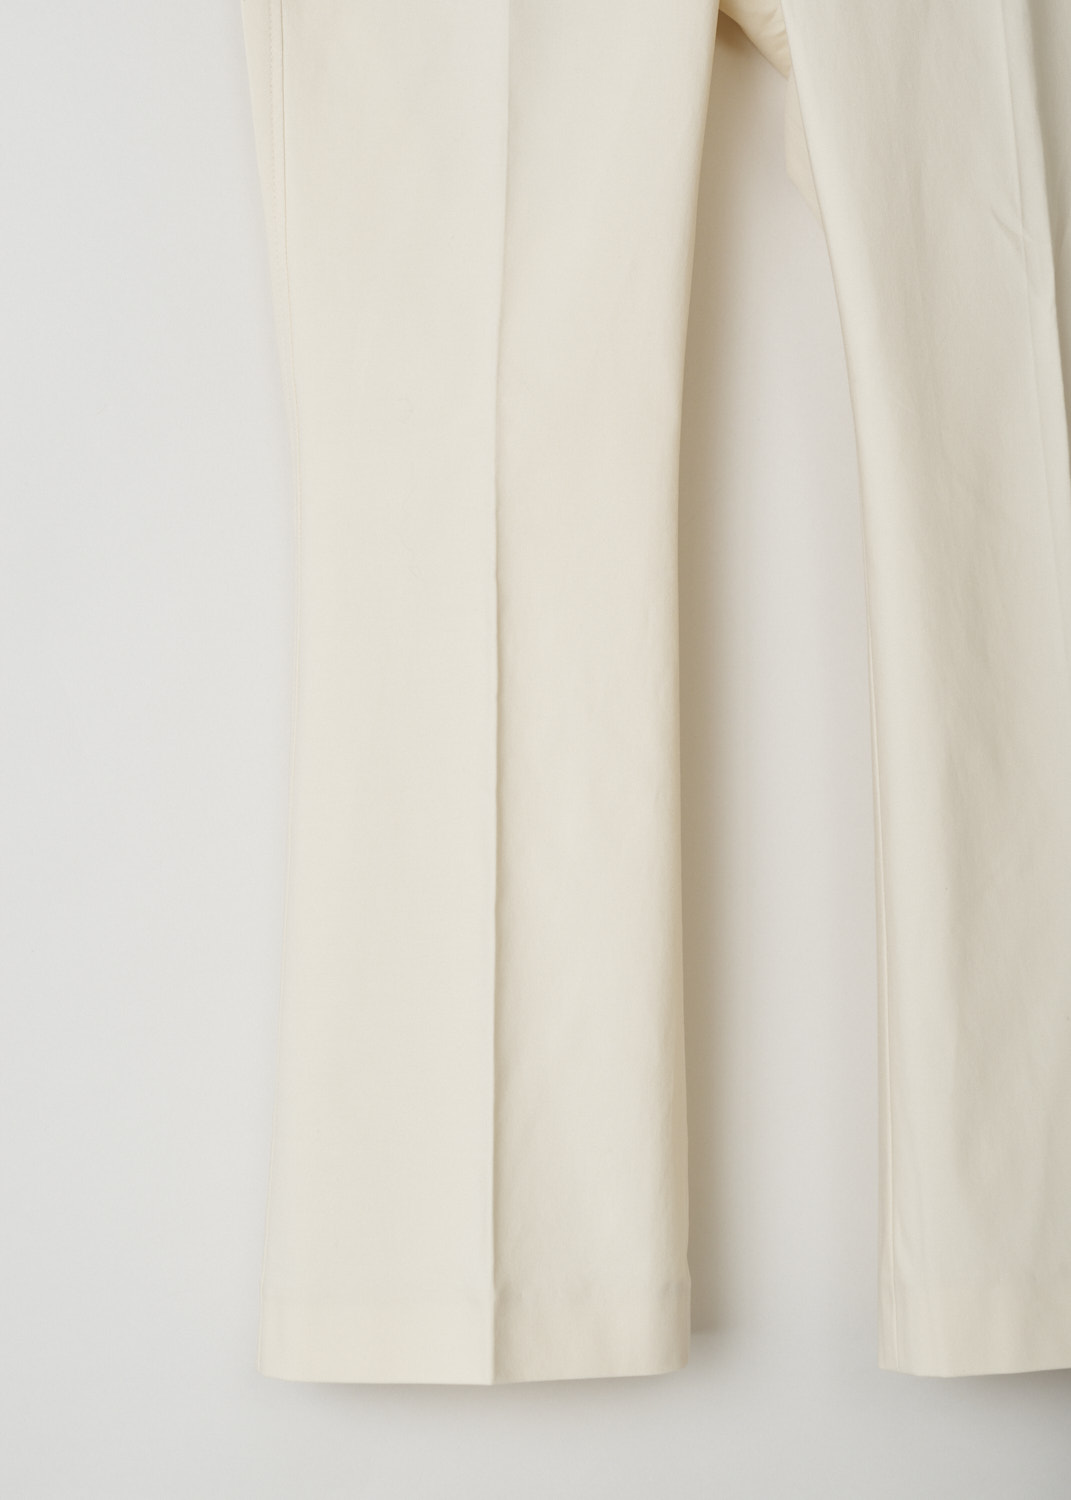 Brunello Cucinelli, Cream coloured boot-cut chino, M0F70P1951_C7070, beige, detail, Made in the flat front model, with boot-cut legs. Furthermore, this model has two forward slanted pockets on the front and two jetted pockets on the back.